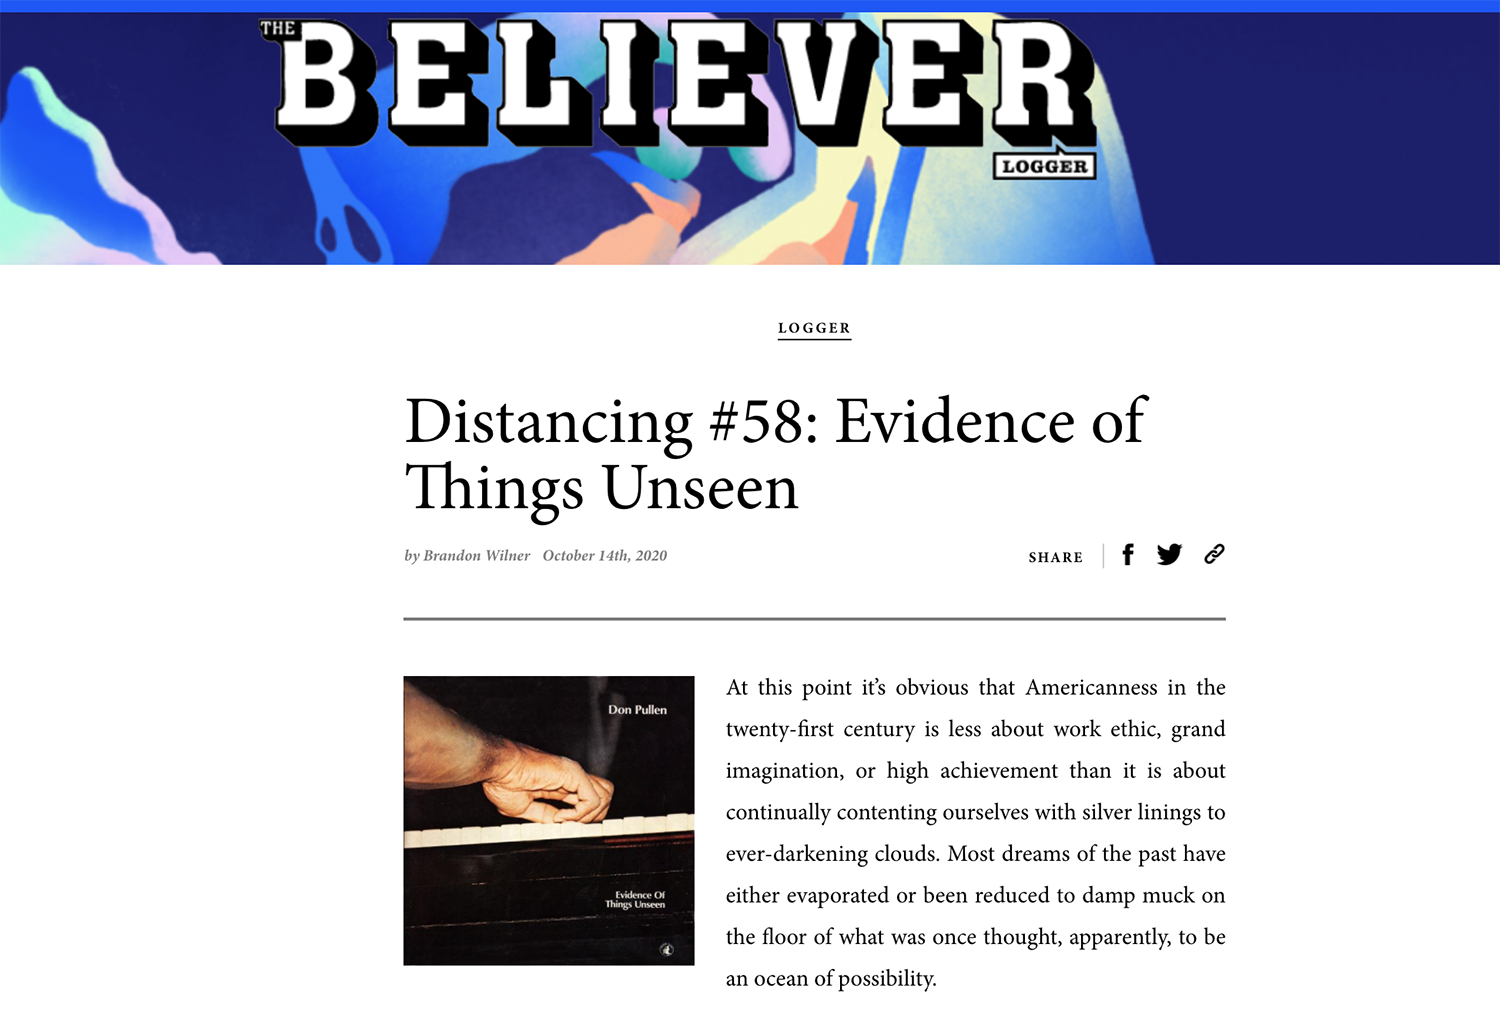 The Believer, Don Pullen's Evidence of Things Unseen